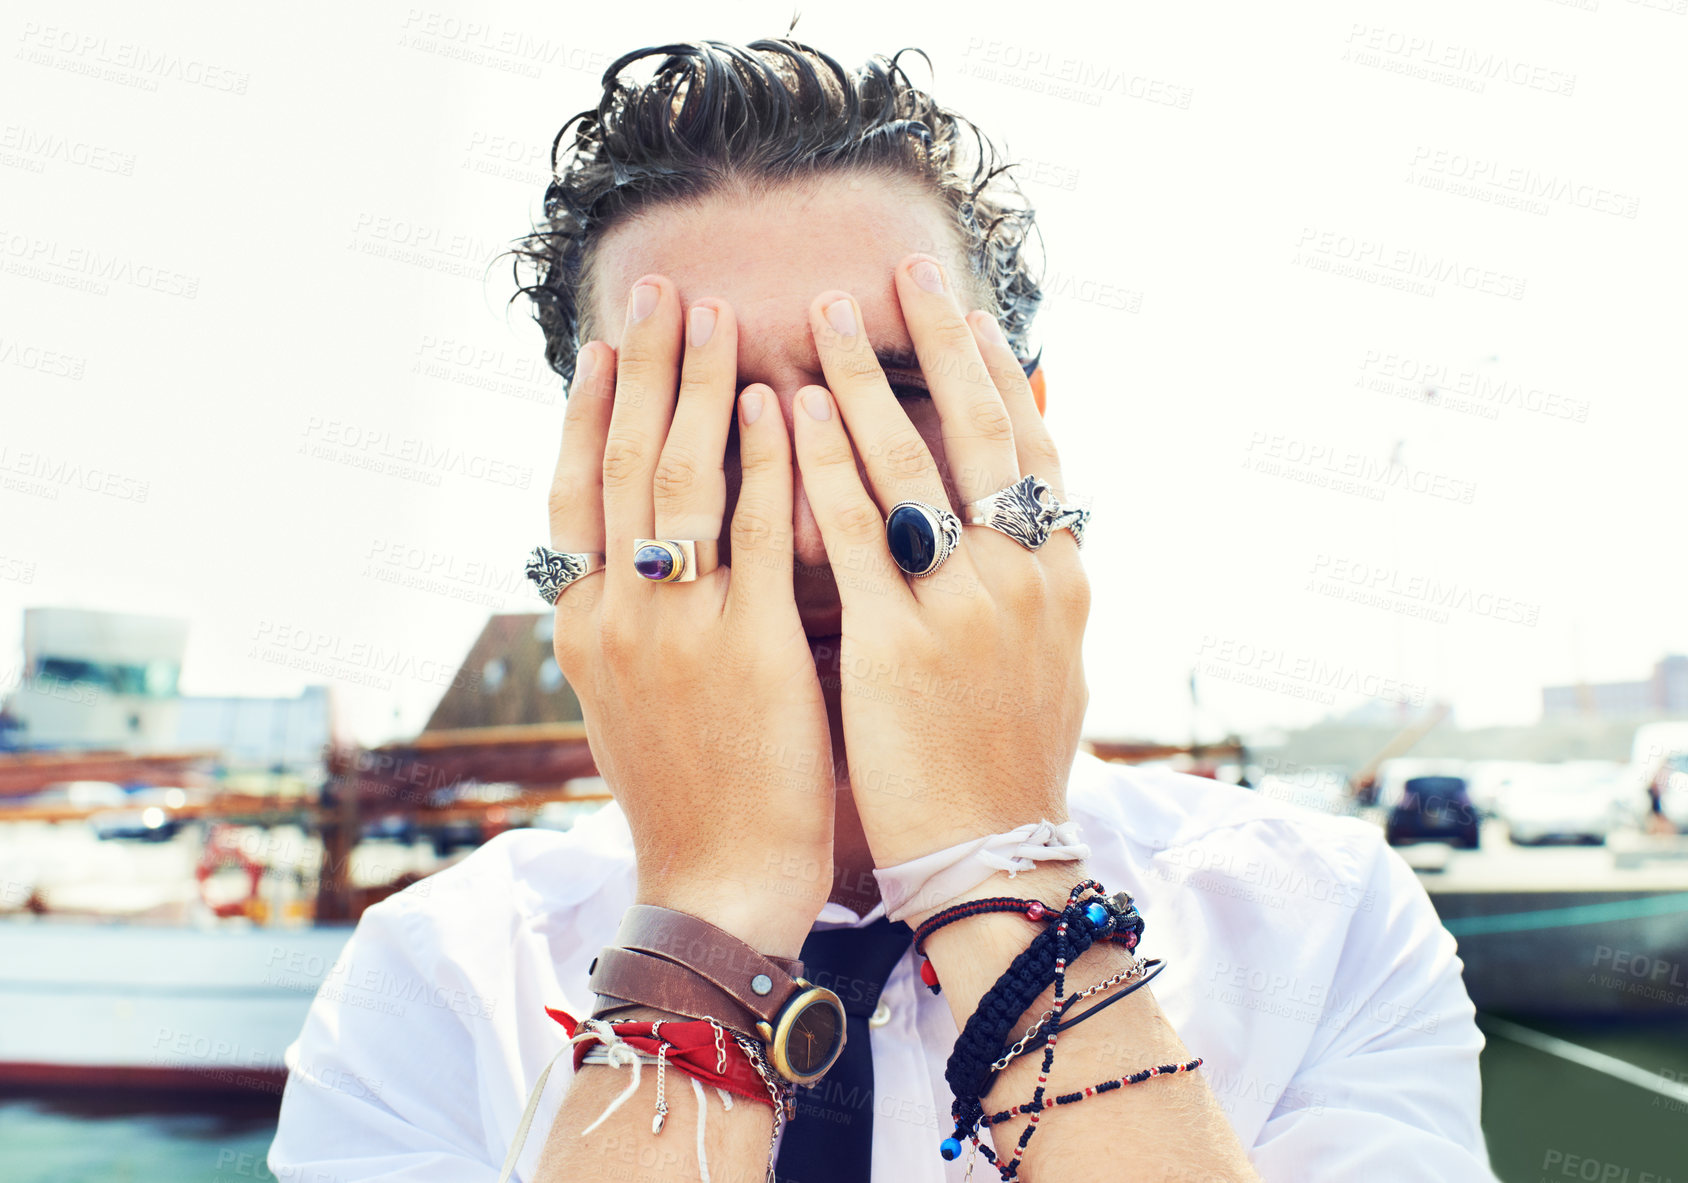 Buy stock photo Hands, rings and accessories with a man in in the harbor by the sea for fashion or style. Jewelry, bracelet and fingers on the face of a young person for trendy or edgy expression by the pier